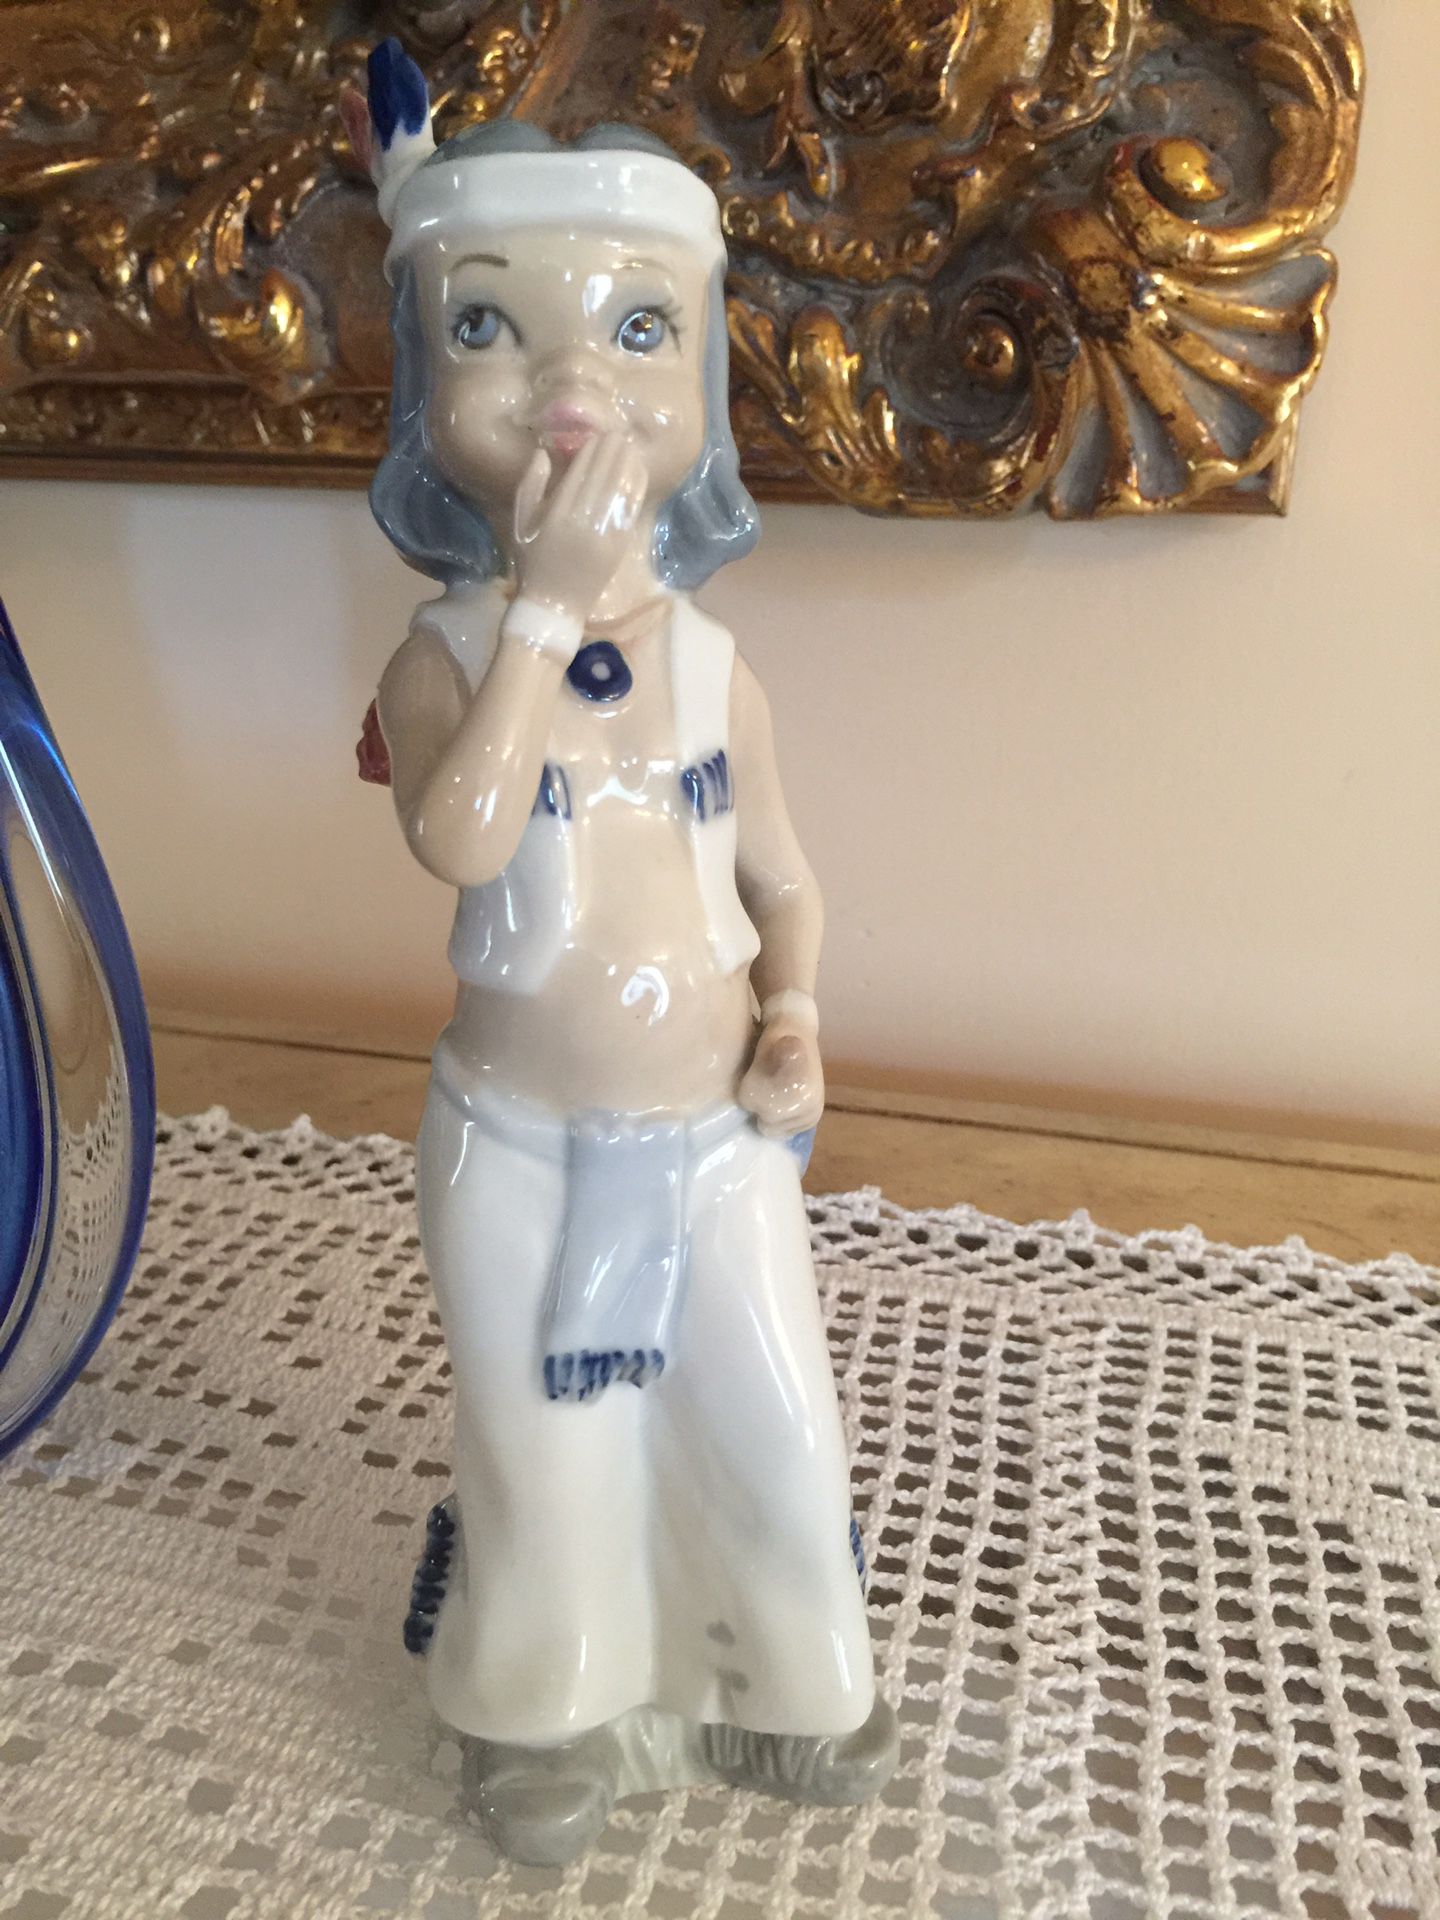 Spanish porcelain Indian boy - free with purchase or make offer - ON HOLD FOR 7/18